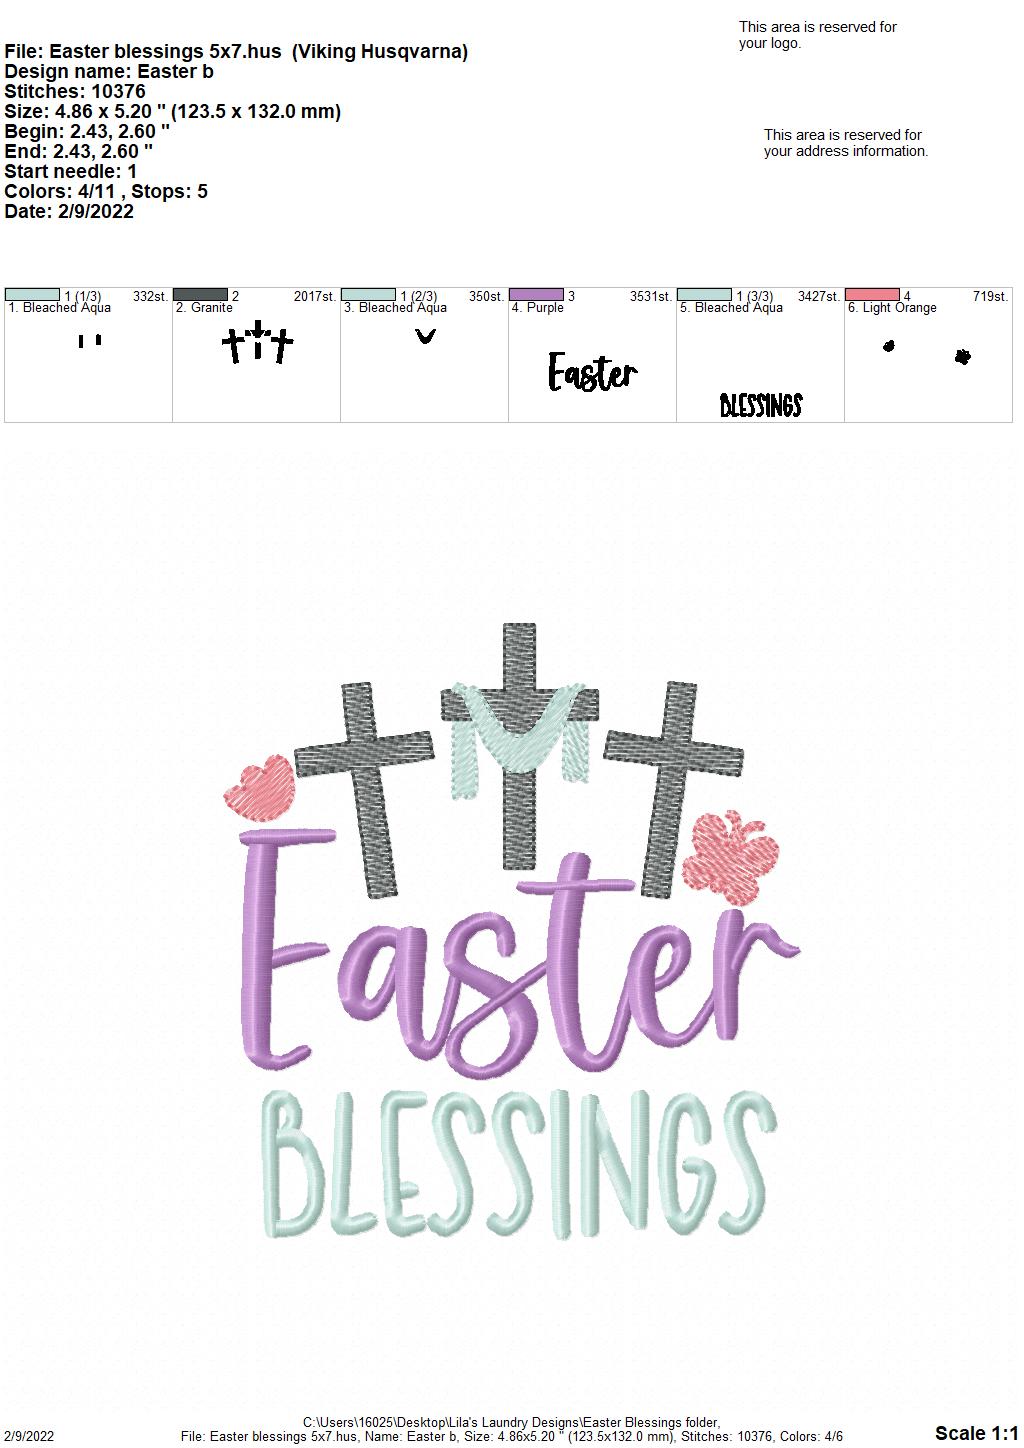 Easter Blessings - 3 sizes- Digital Embroidery Design